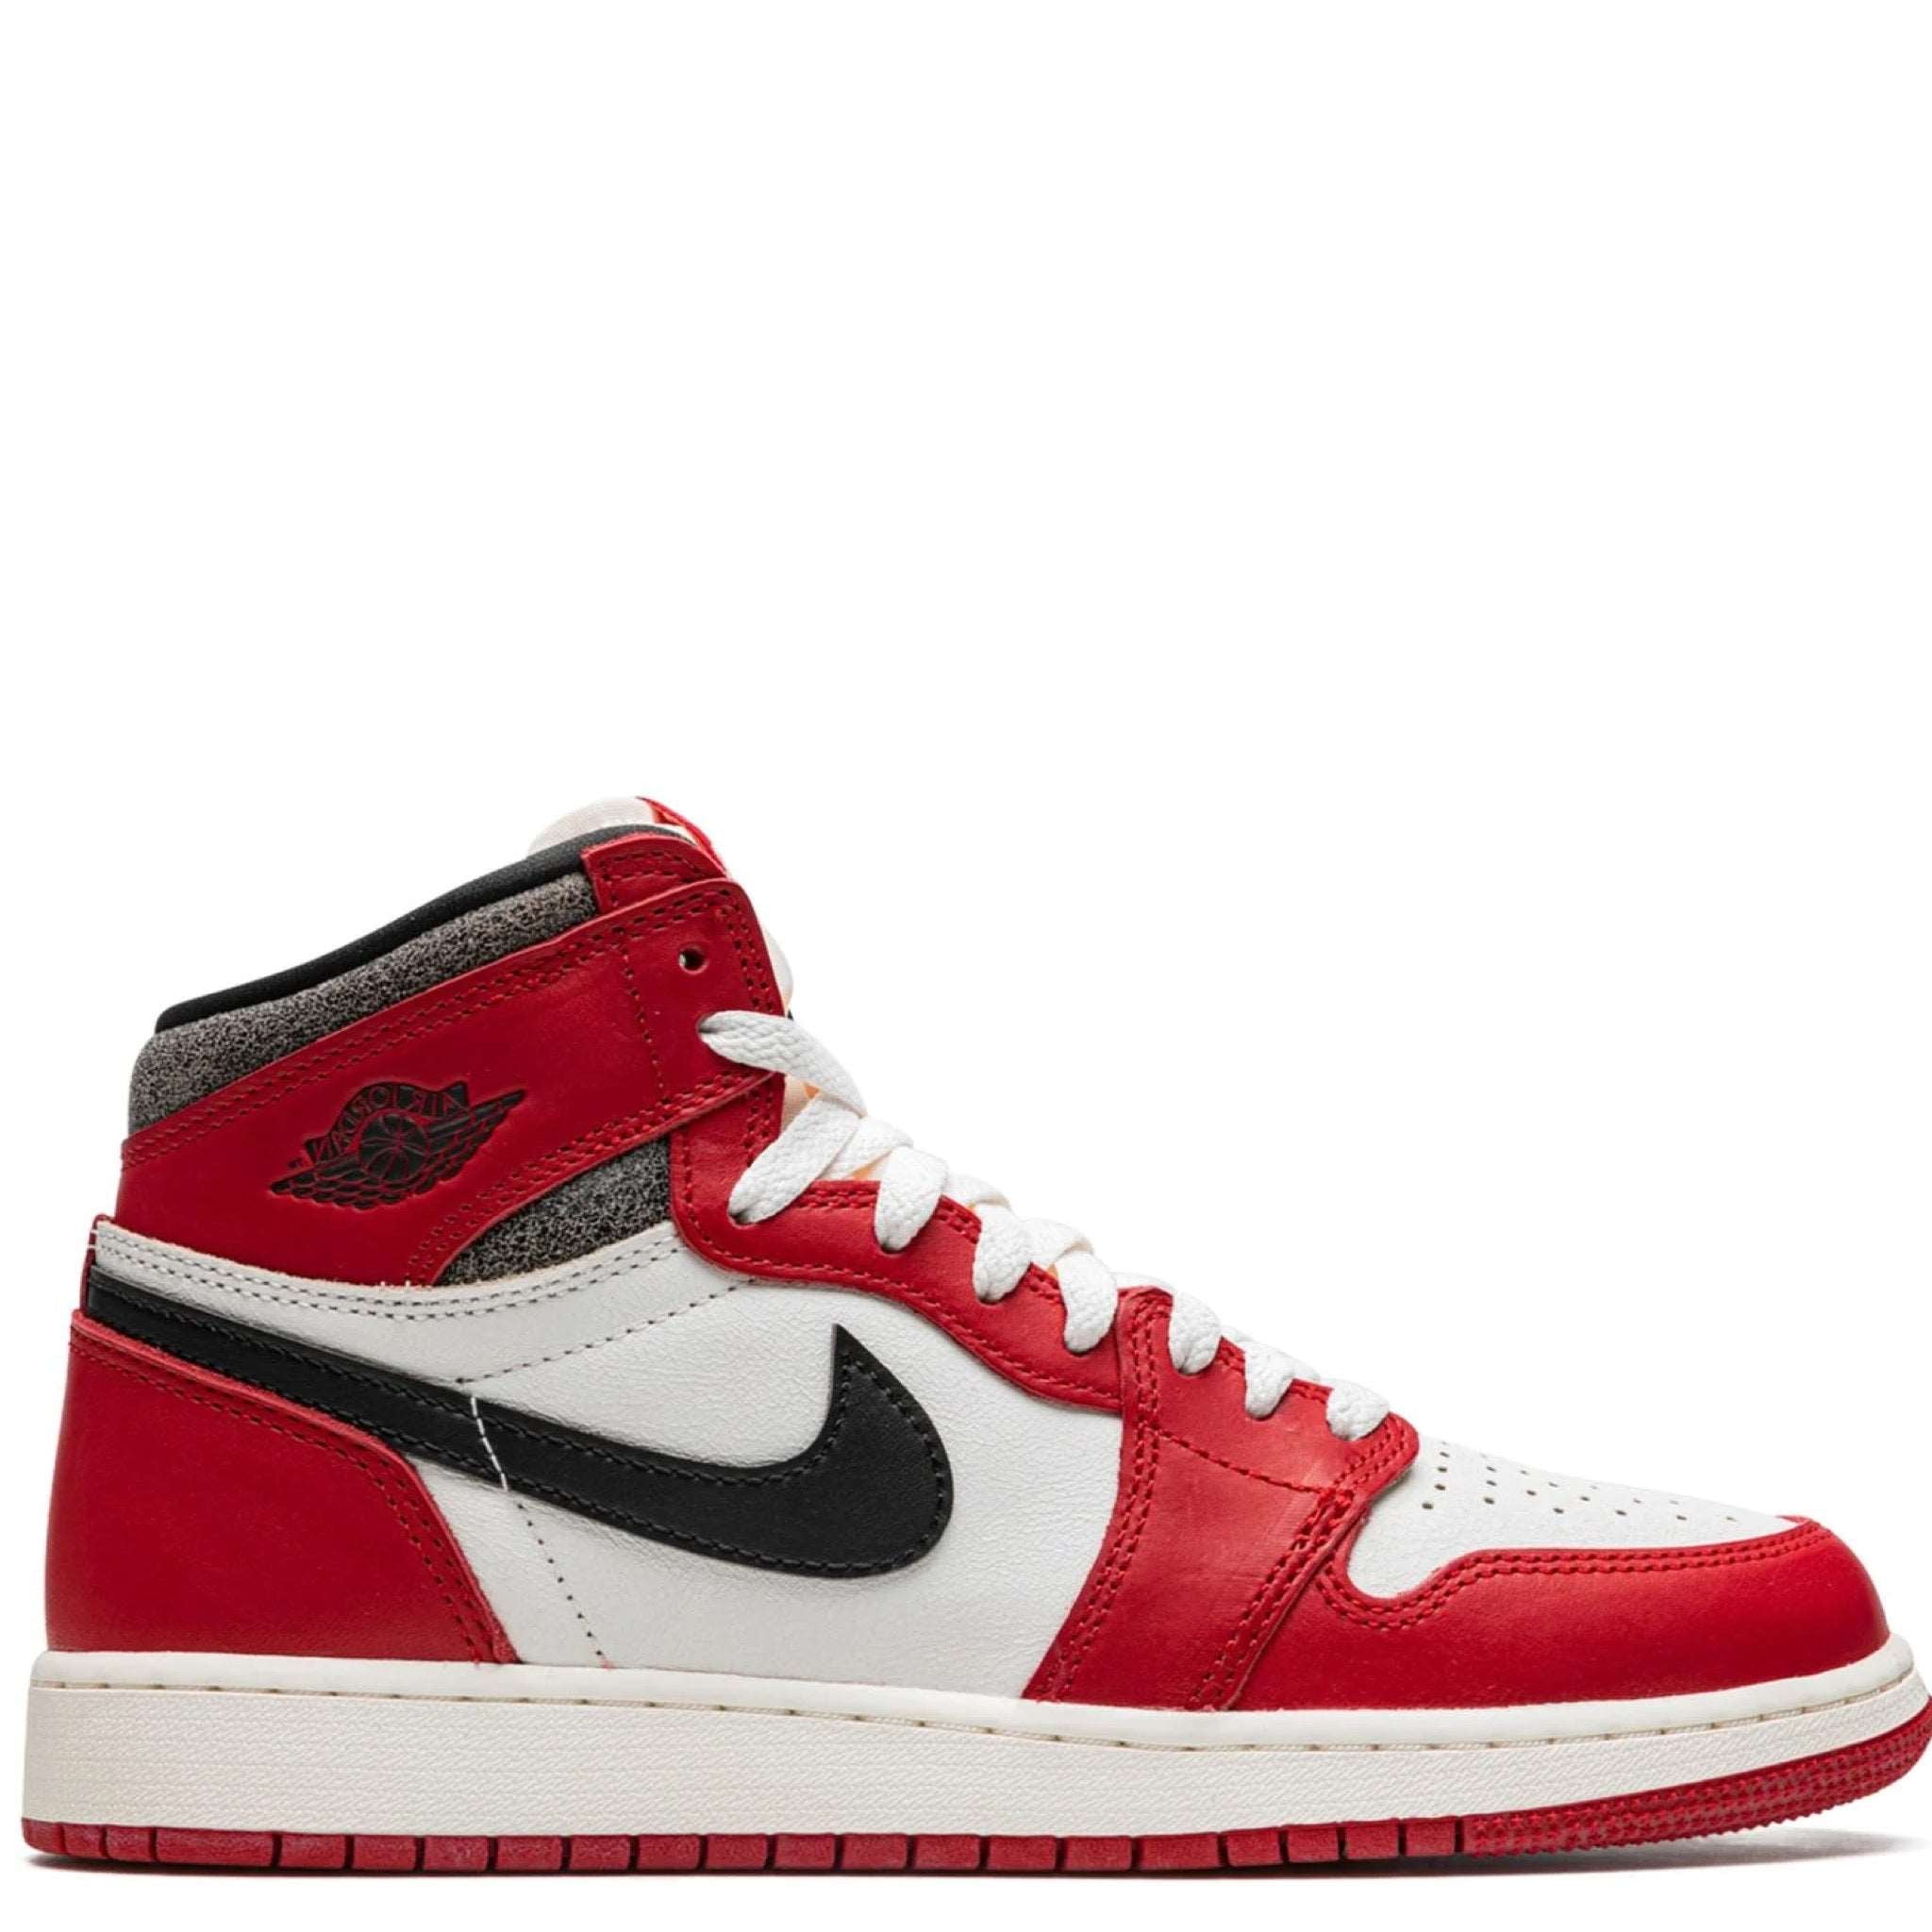 AIR JORDAN 1 RETRO HIGH CHICAGO LOST AND FOUND (GS)